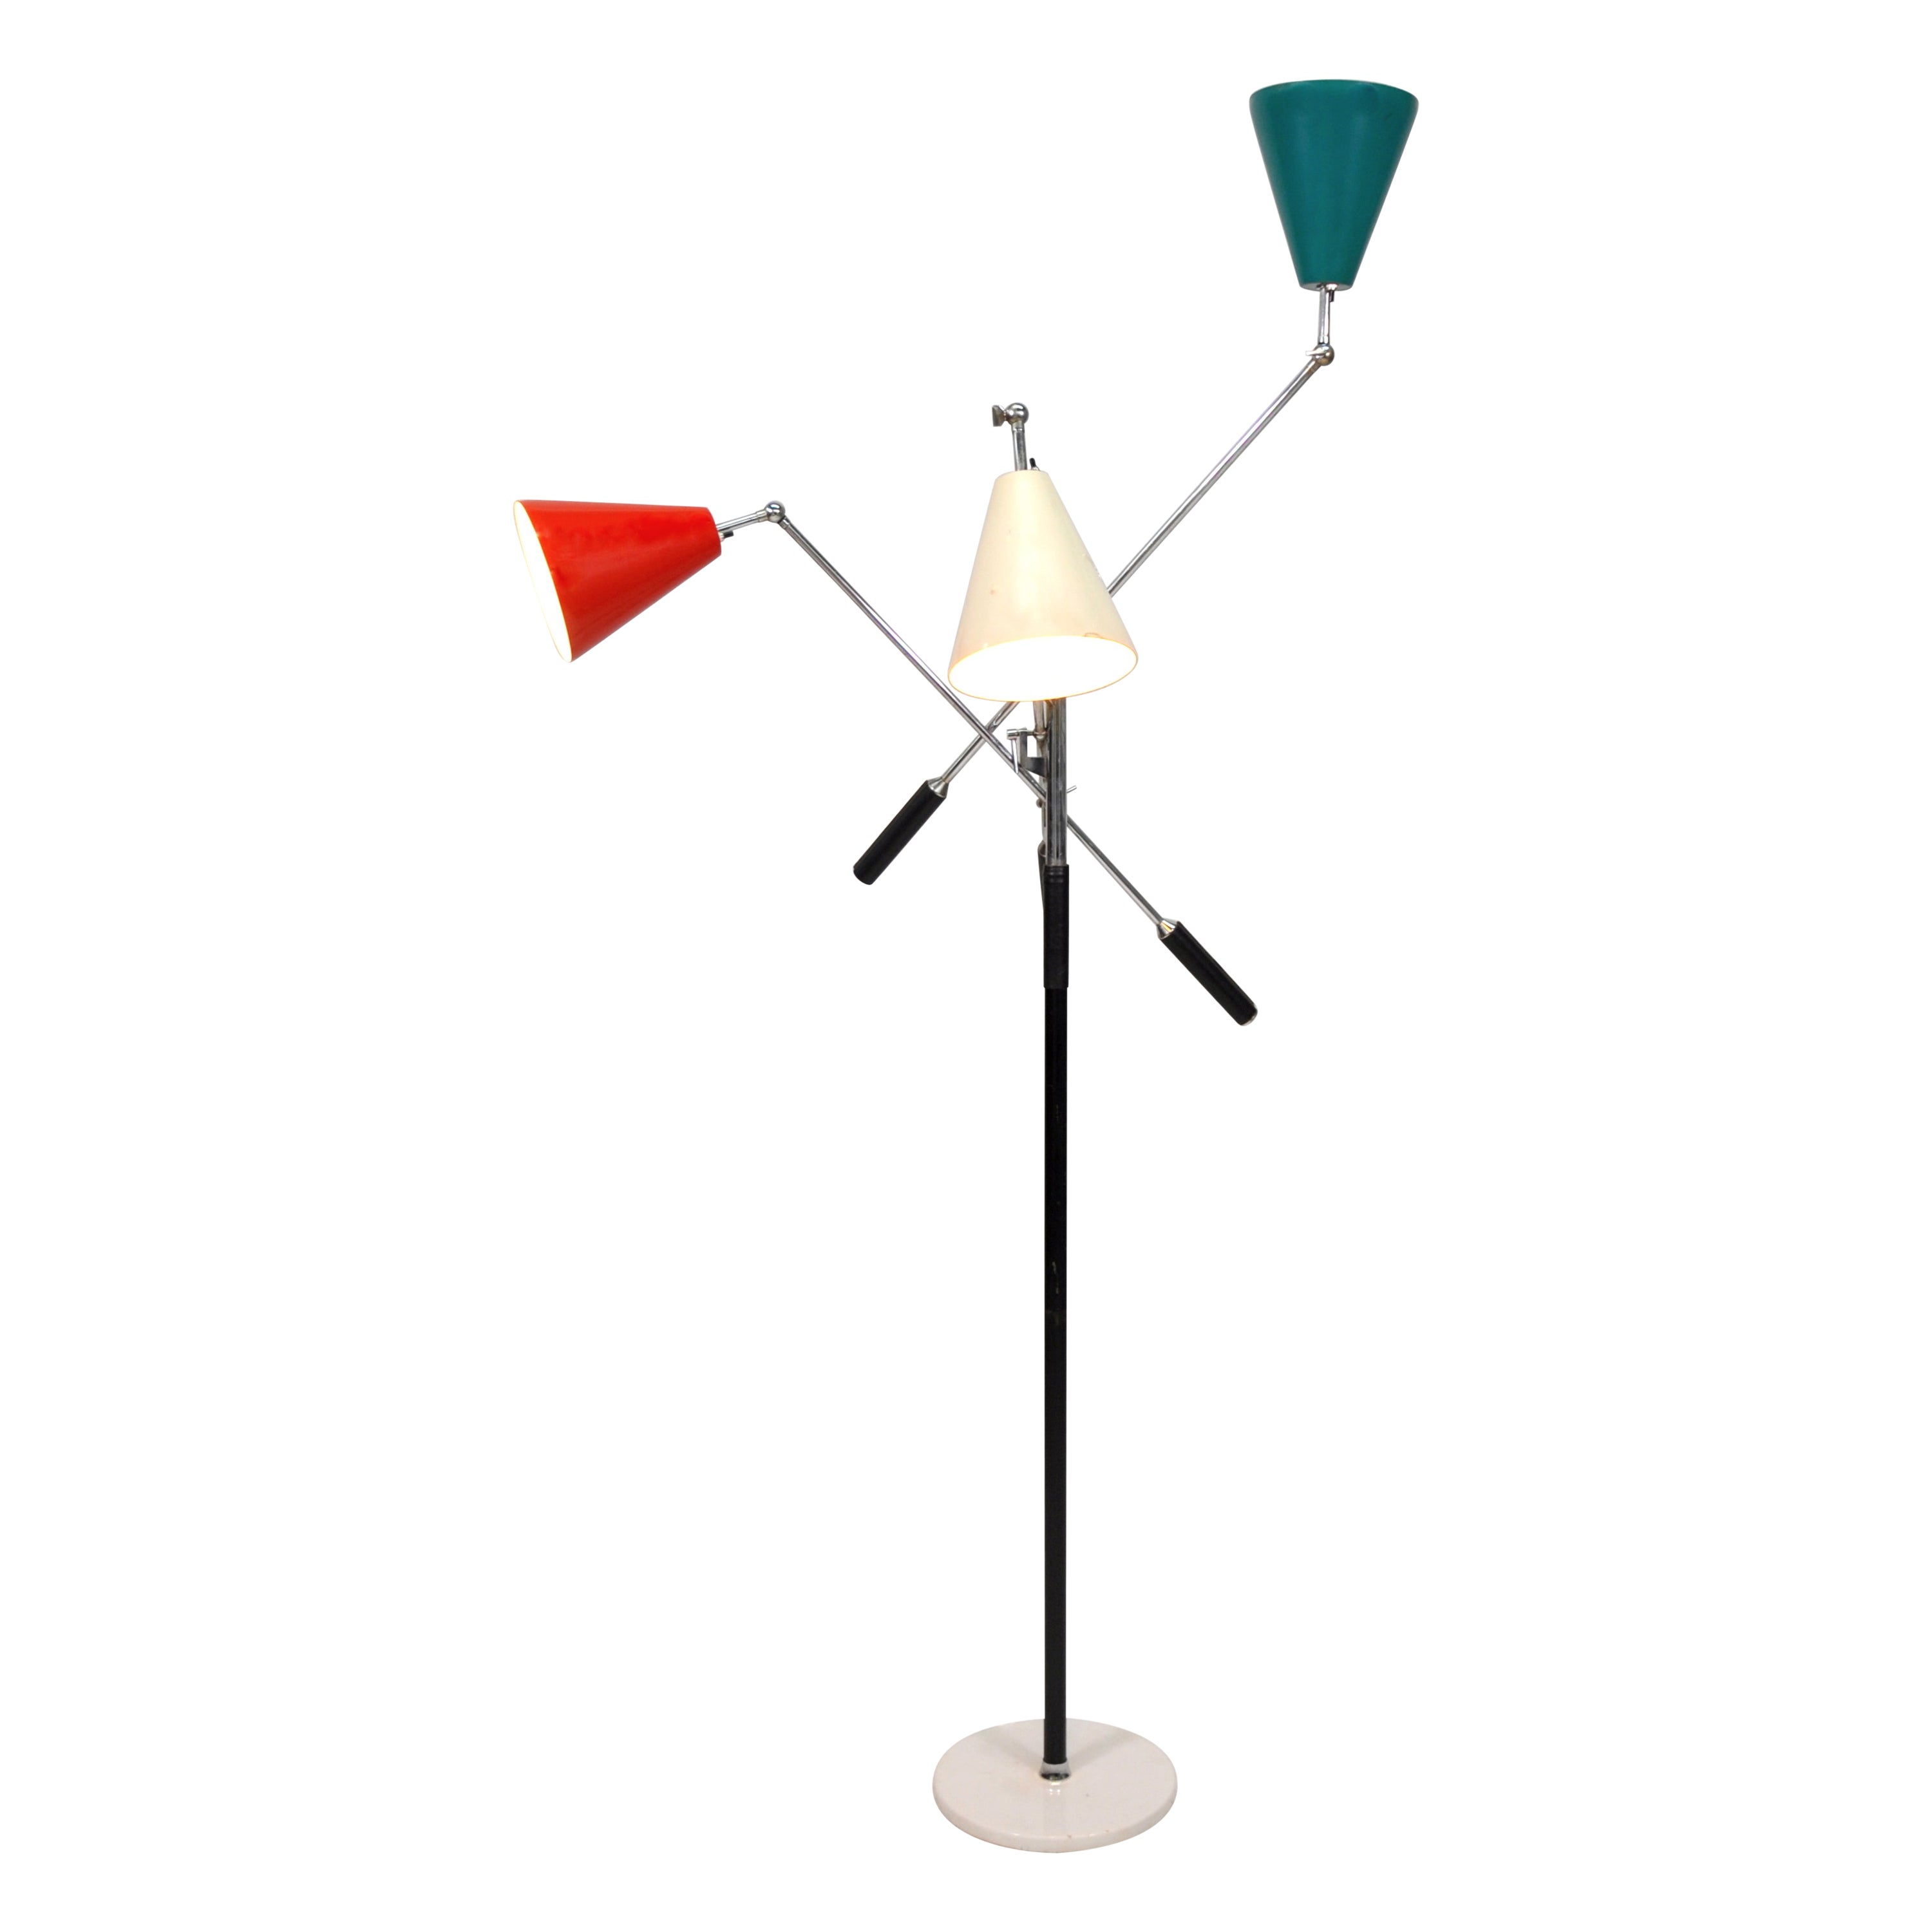 1950s Italian Triennale Floor Lamp by Arredoluce in Chrome, White, Red & Teal For Sale